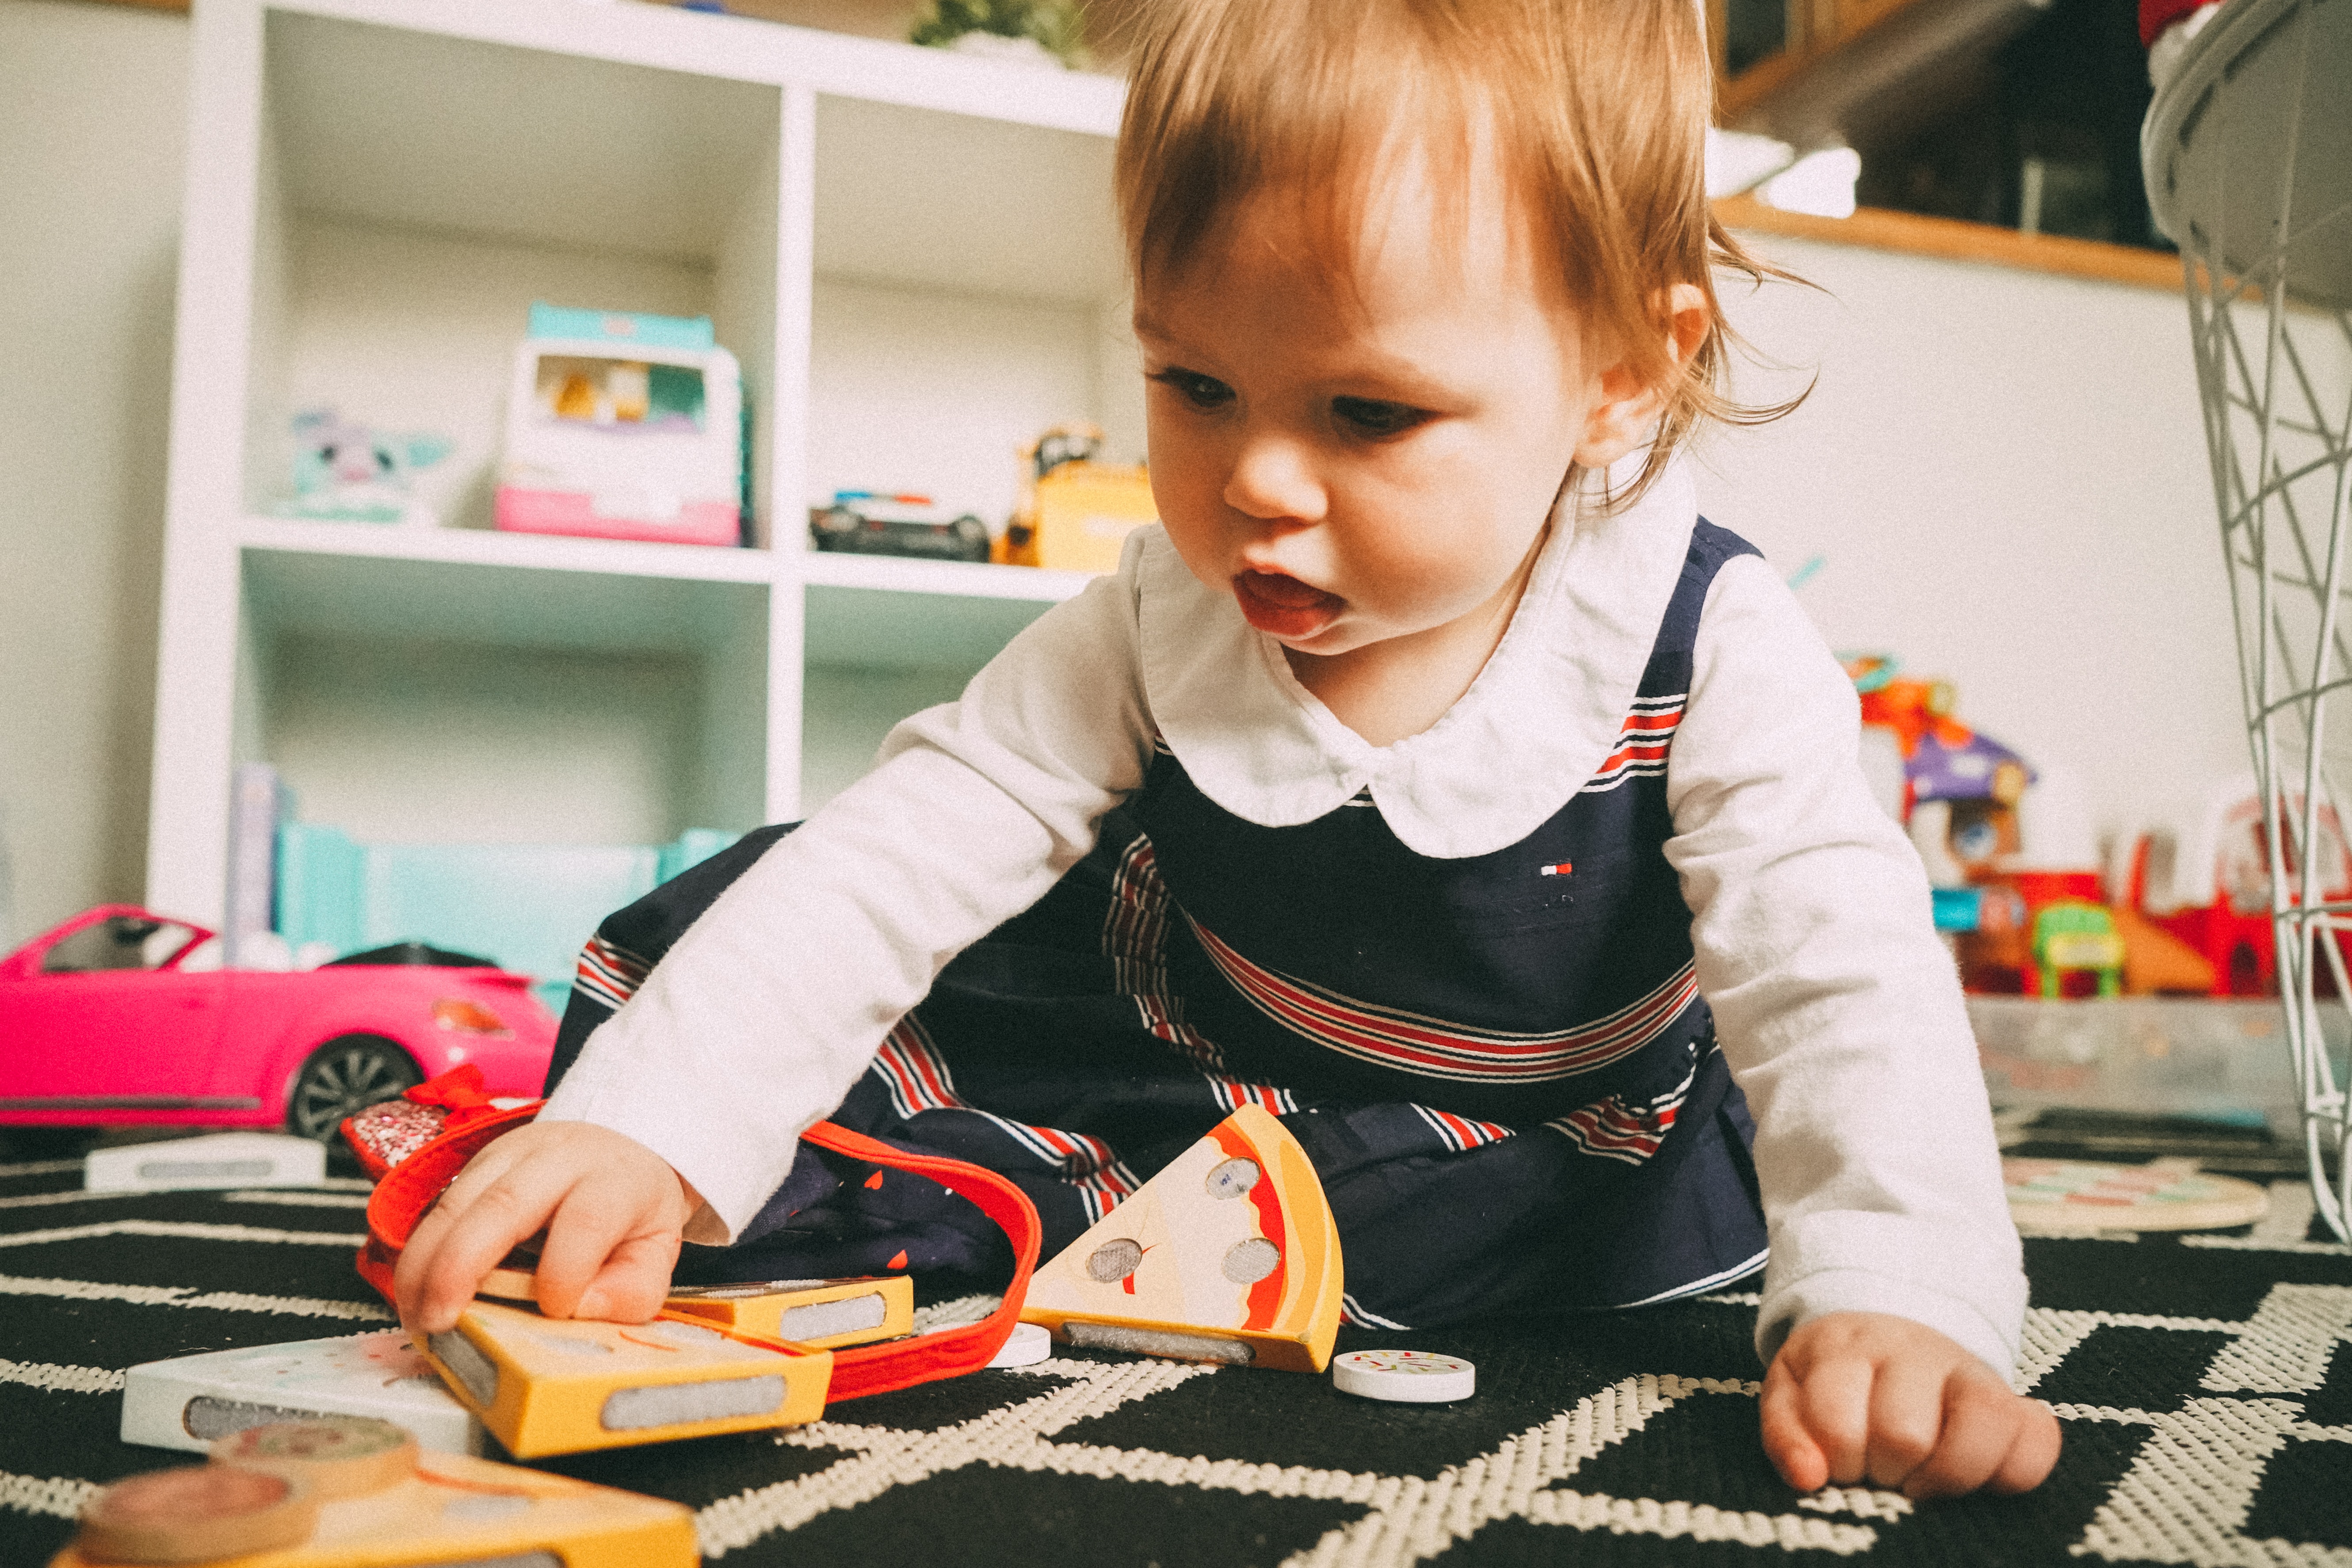 A baby plays with wooden toys on a carpert.